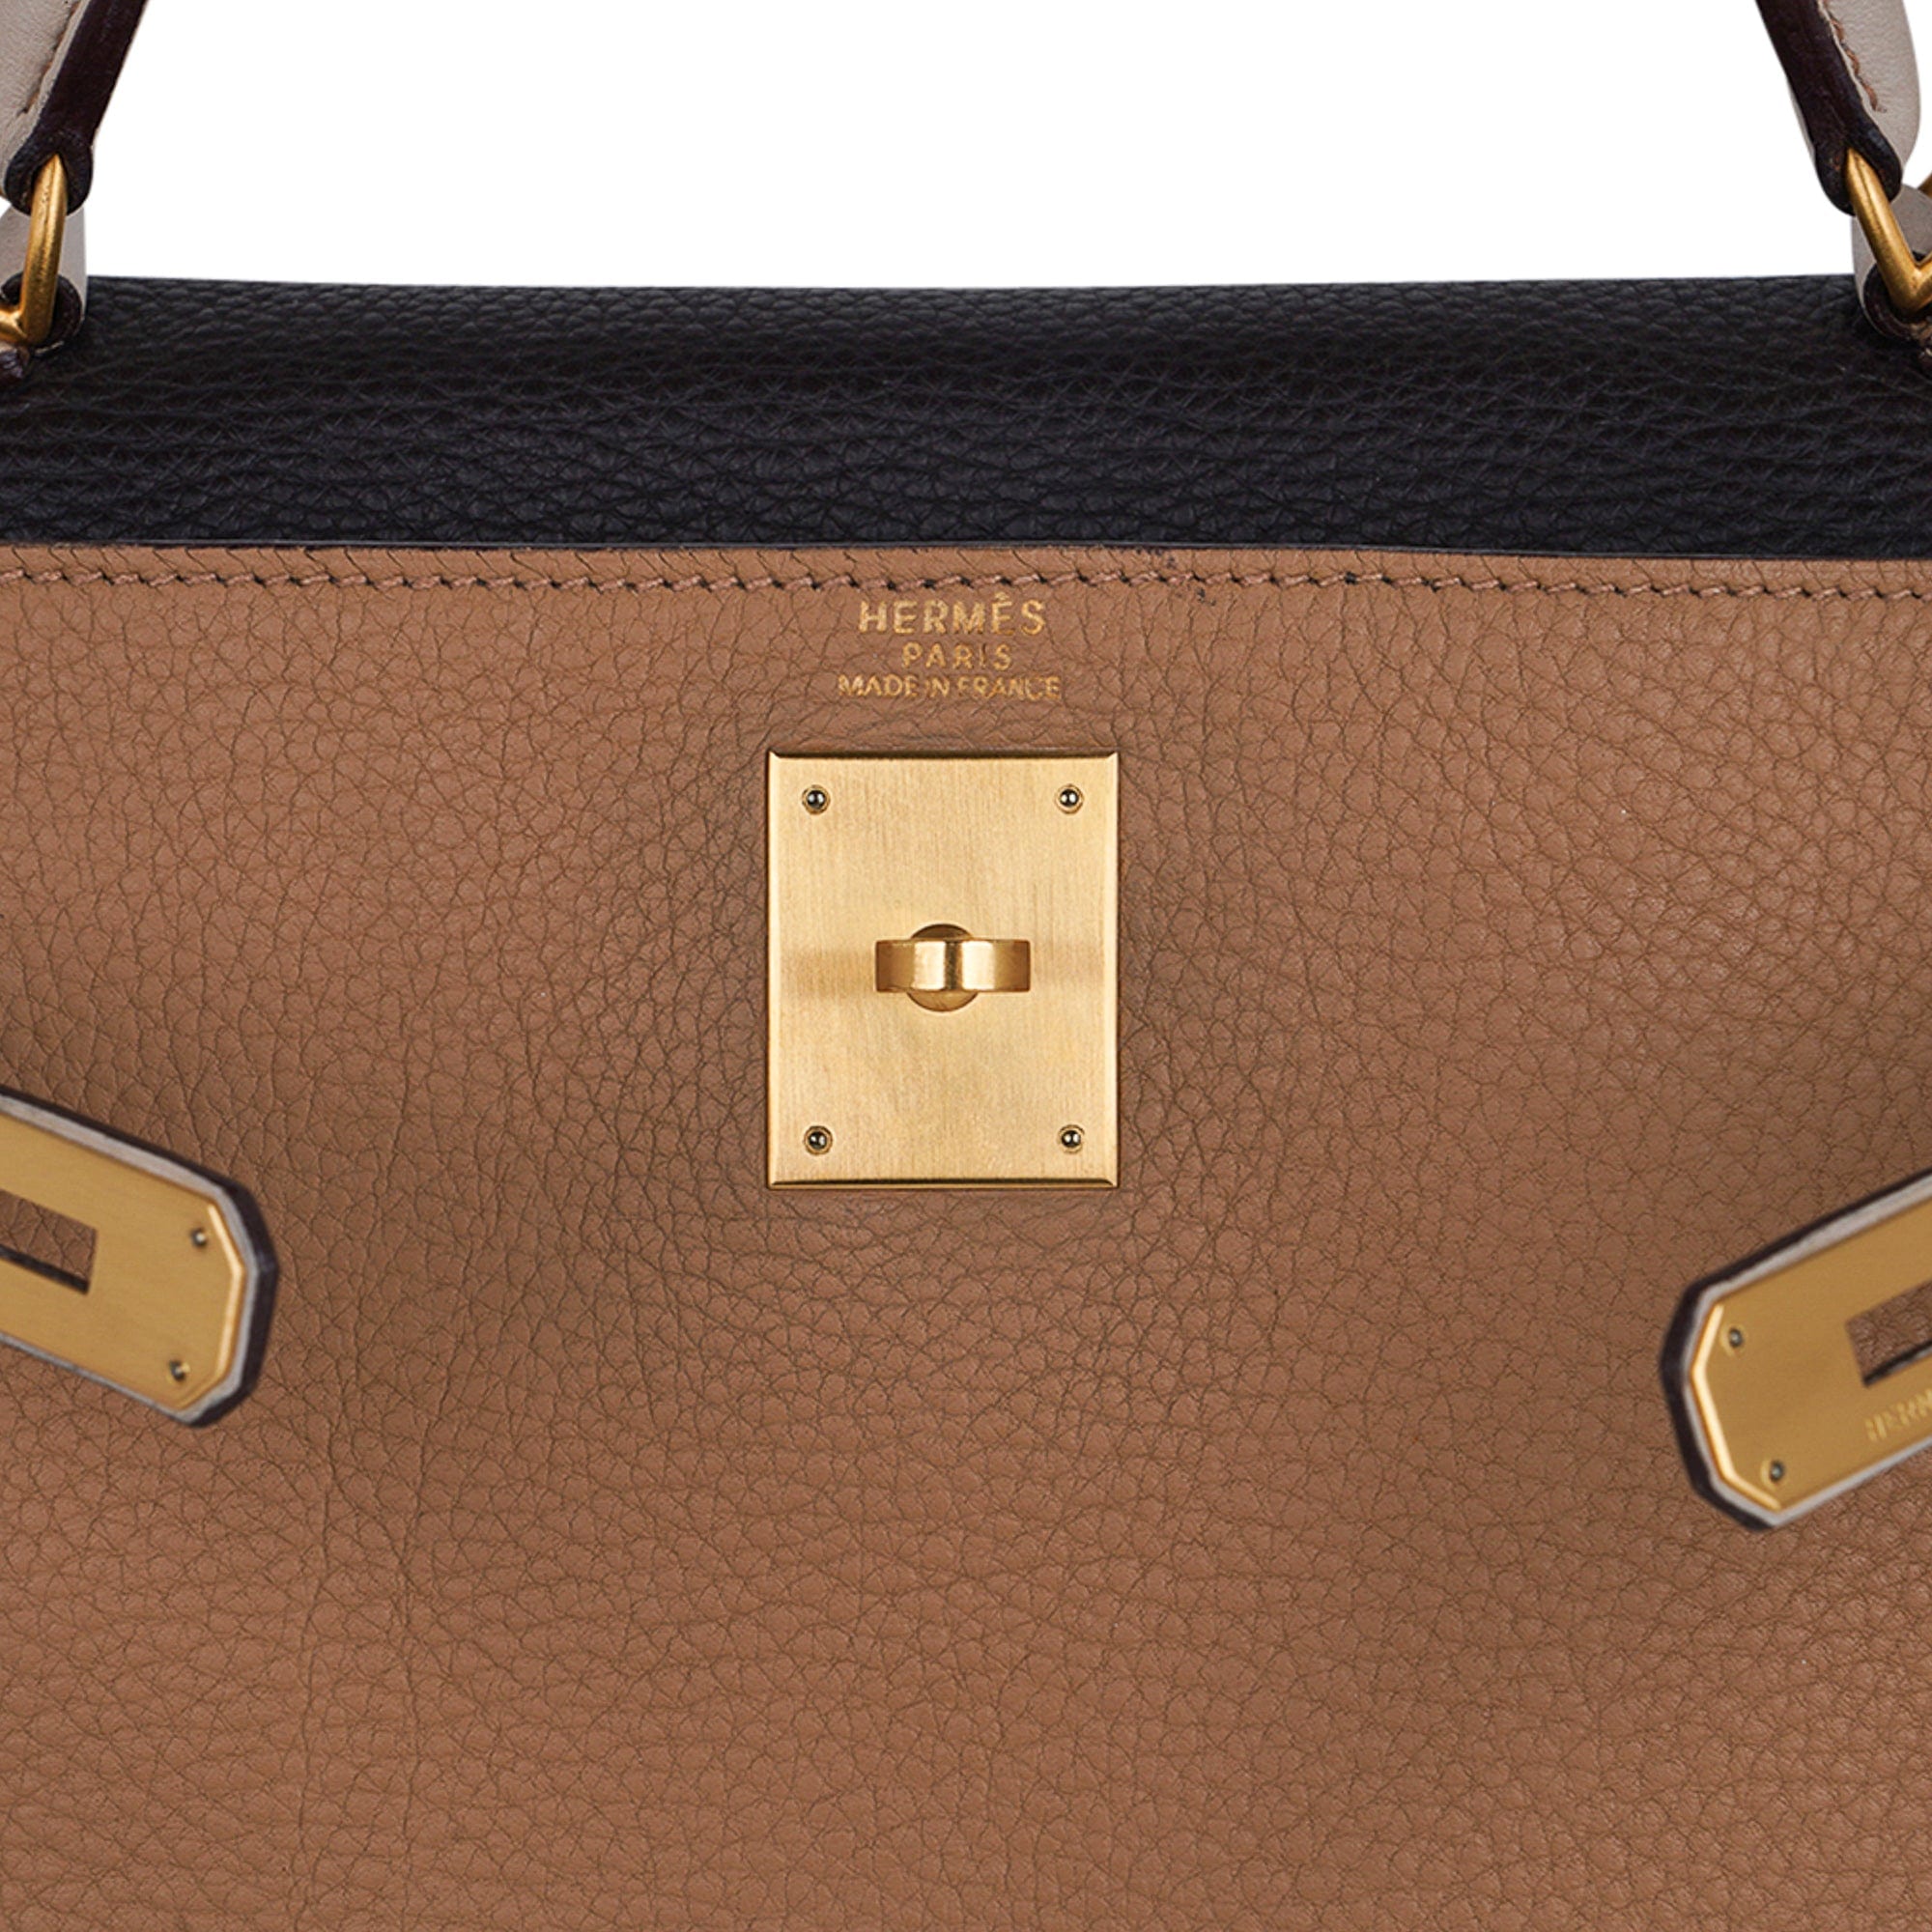 Hermes Limited Edition Kelly 32 Tri-Color Bag Tabac Camel, Ebene, & Pa –  Mightychic